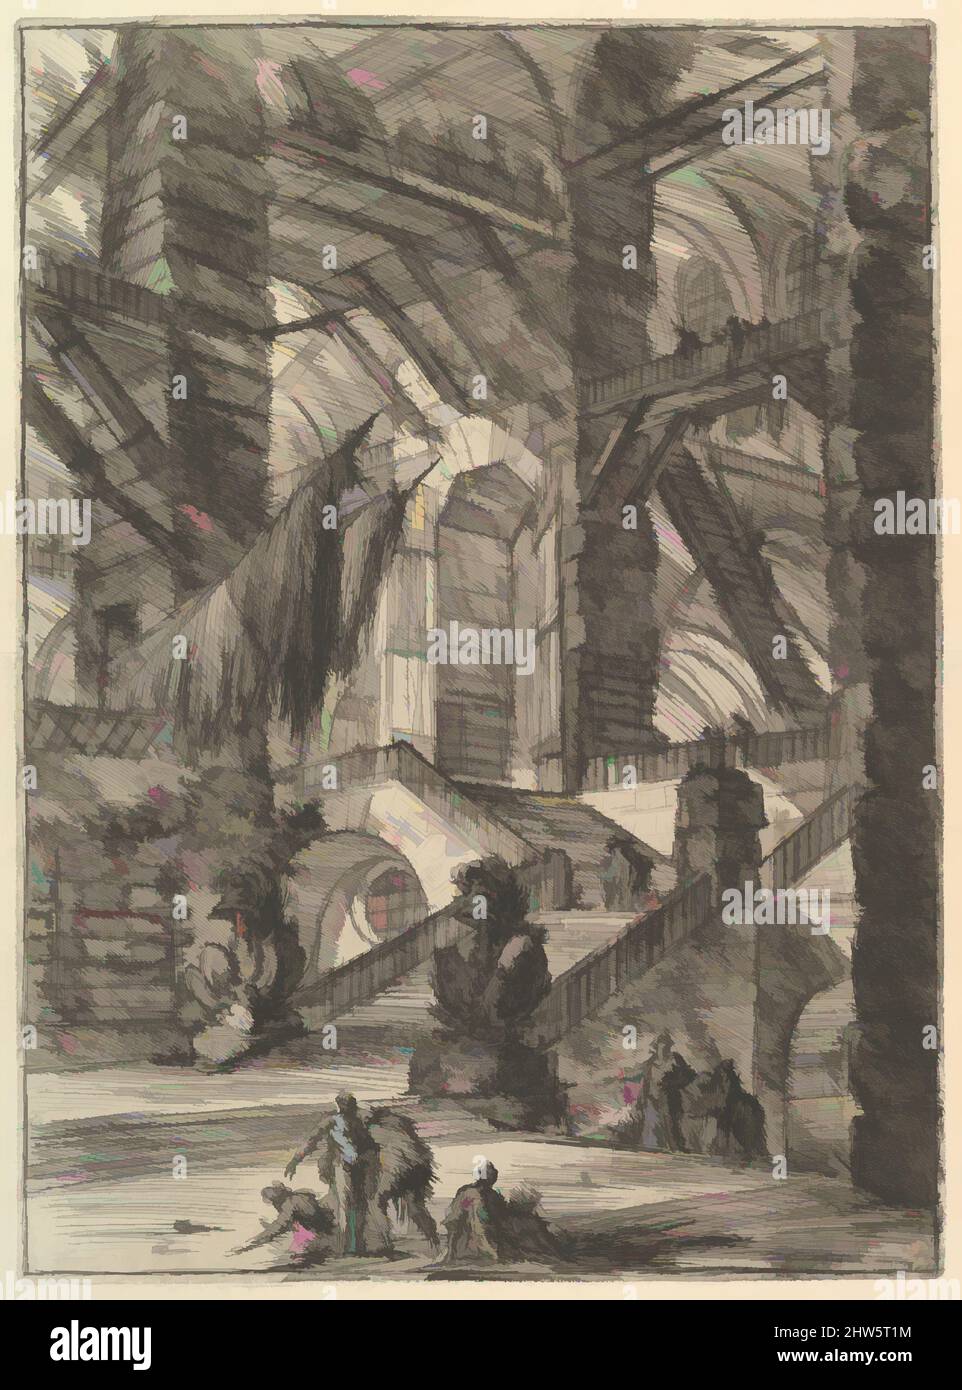 Art inspired by The Staircase with Trophies, from Carceri d'invenzione (Imaginary Prisons), ca. 1749–50, Etching, engraving; first state of six (Robison), Sheet: 25 x 19 1/2 in. (63.5 x 49.5 cm), Prints, Giovanni Battista Piranesi (Italian, Mogliano Veneto 1720–1778 Rome, Classic works modernized by Artotop with a splash of modernity. Shapes, color and value, eye-catching visual impact on art. Emotions through freedom of artworks in a contemporary way. A timeless message pursuing a wildly creative new direction. Artists turning to the digital medium and creating the Artotop NFT Stock Photo